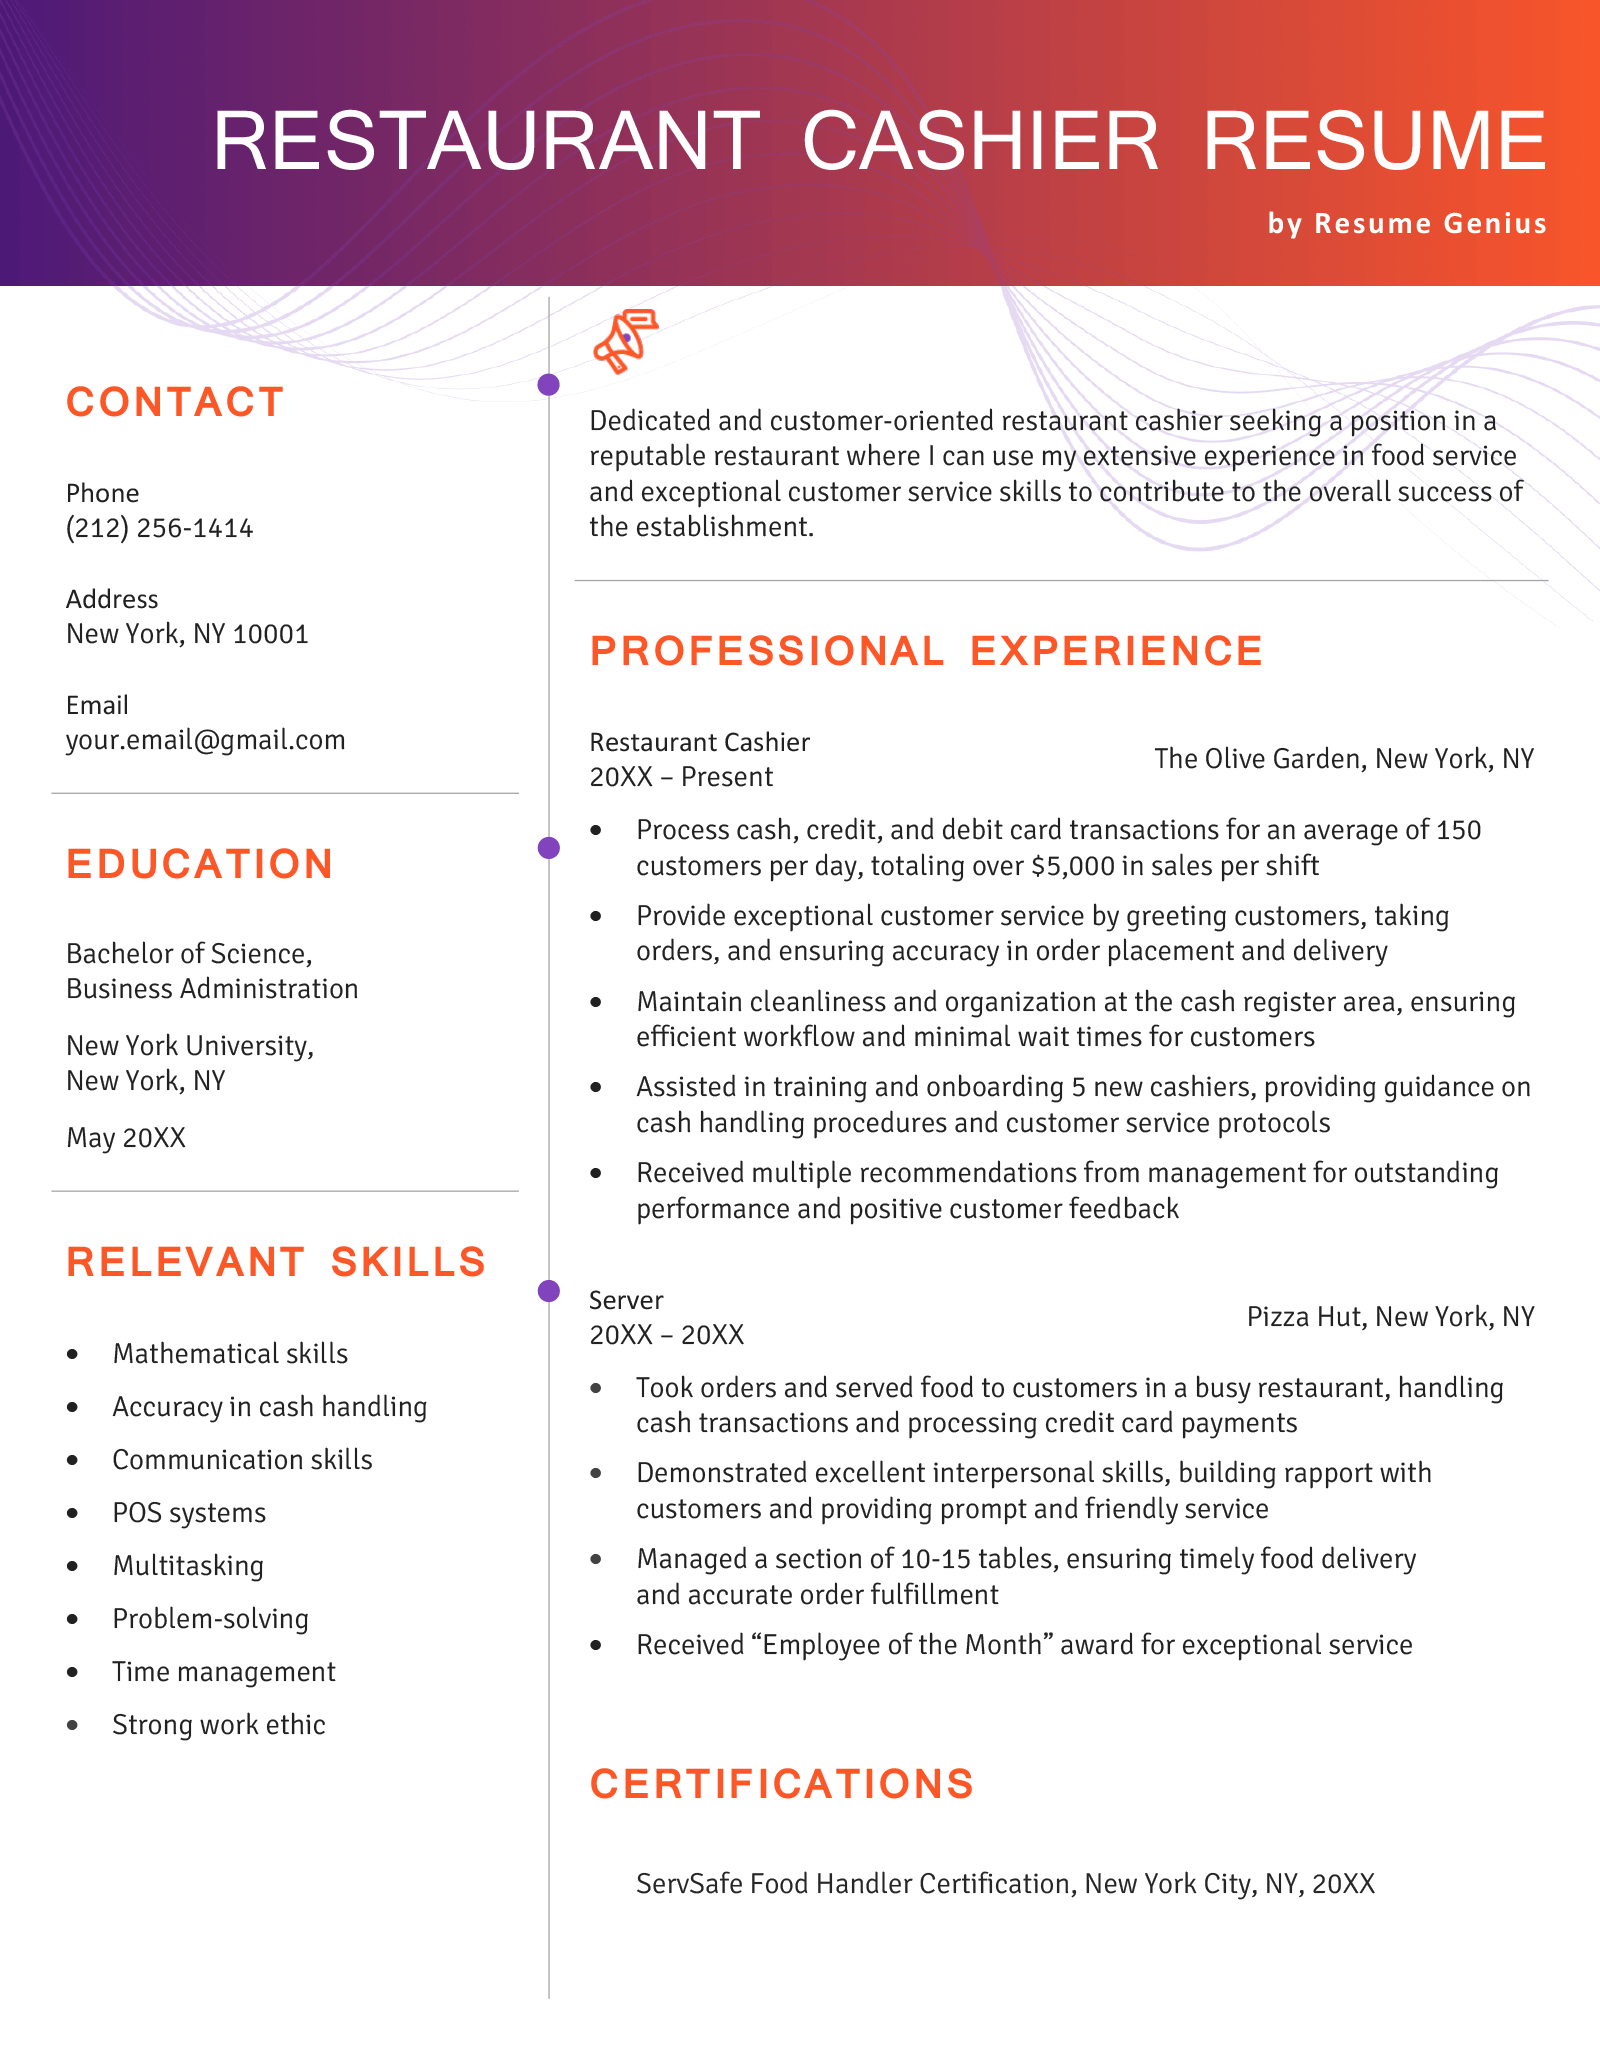 Example image of a restaurant cashier resume with a bright purple and orange header.